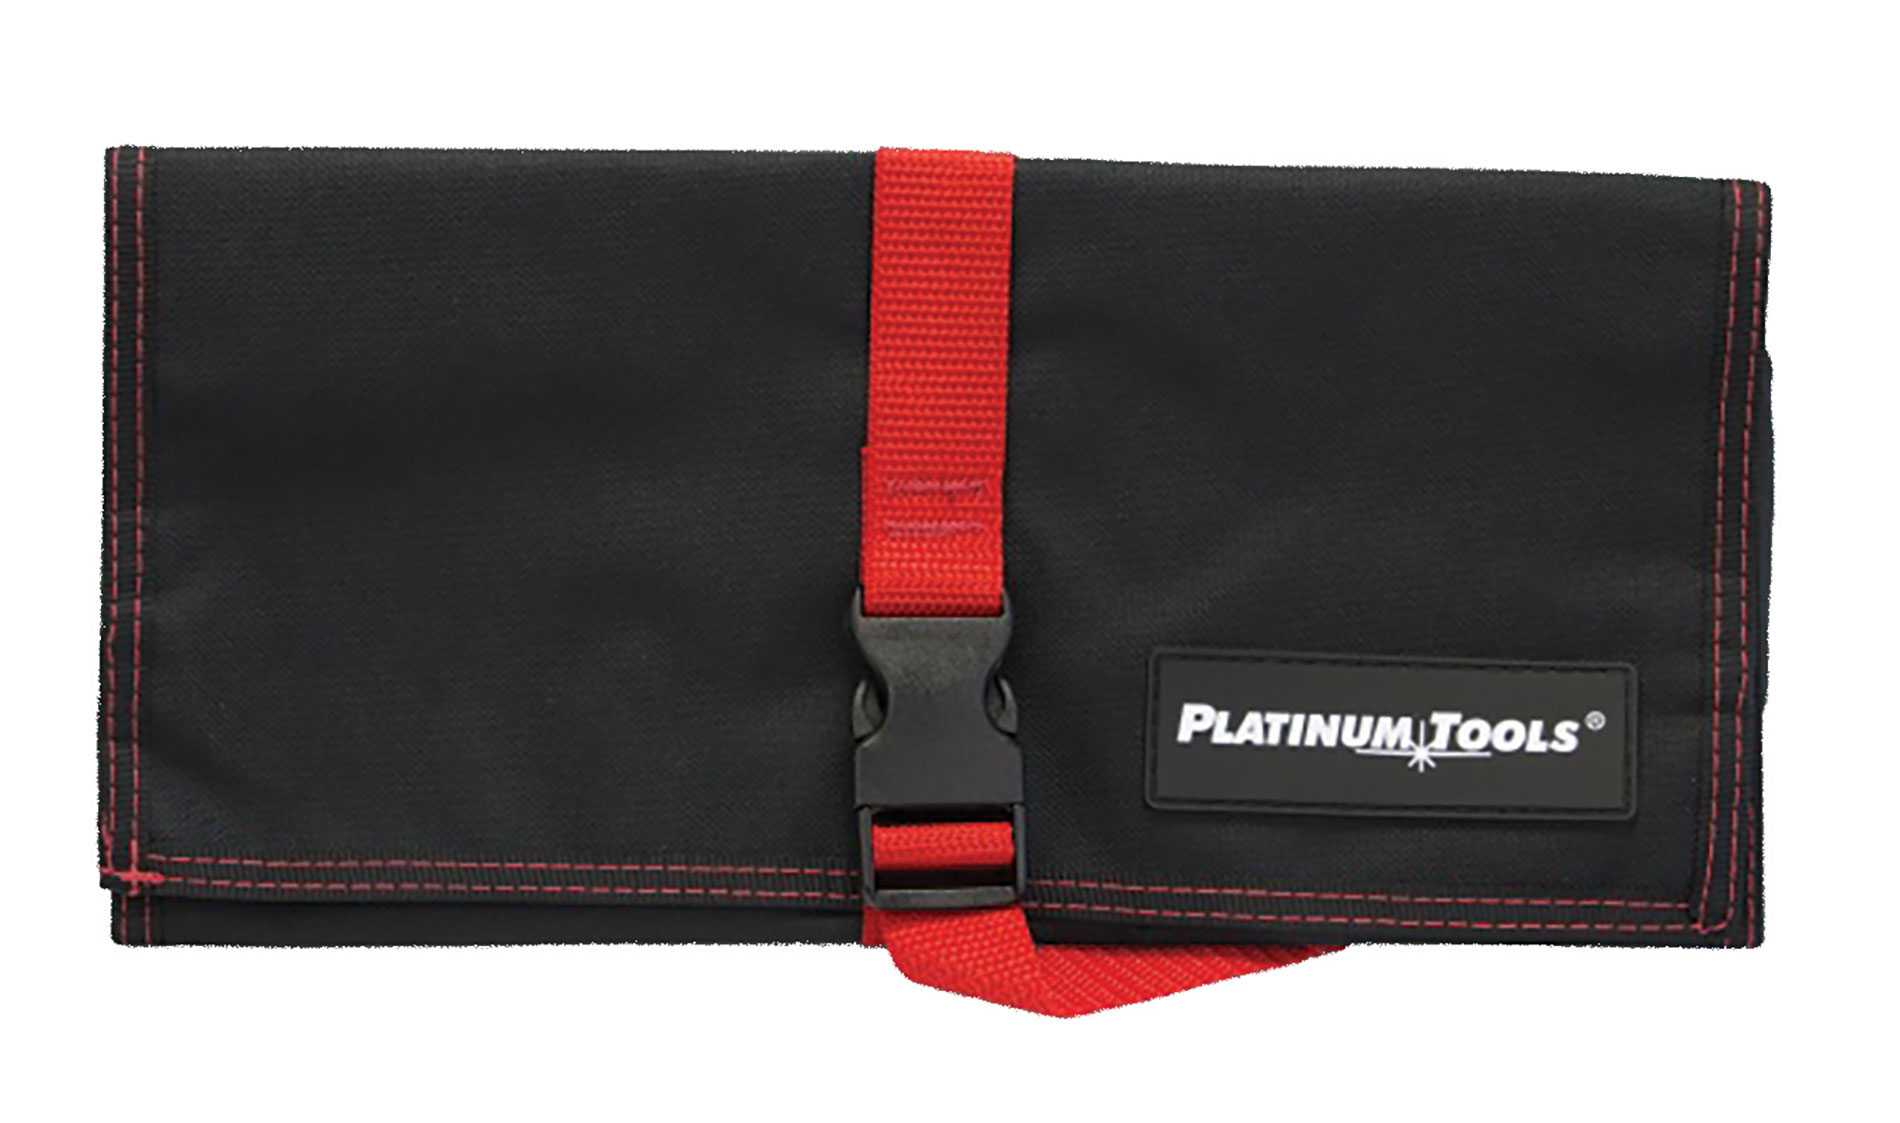 Black pouch with the Platinum Tools logo and a red strap and black snap buckle. Image by Platinum Tools.